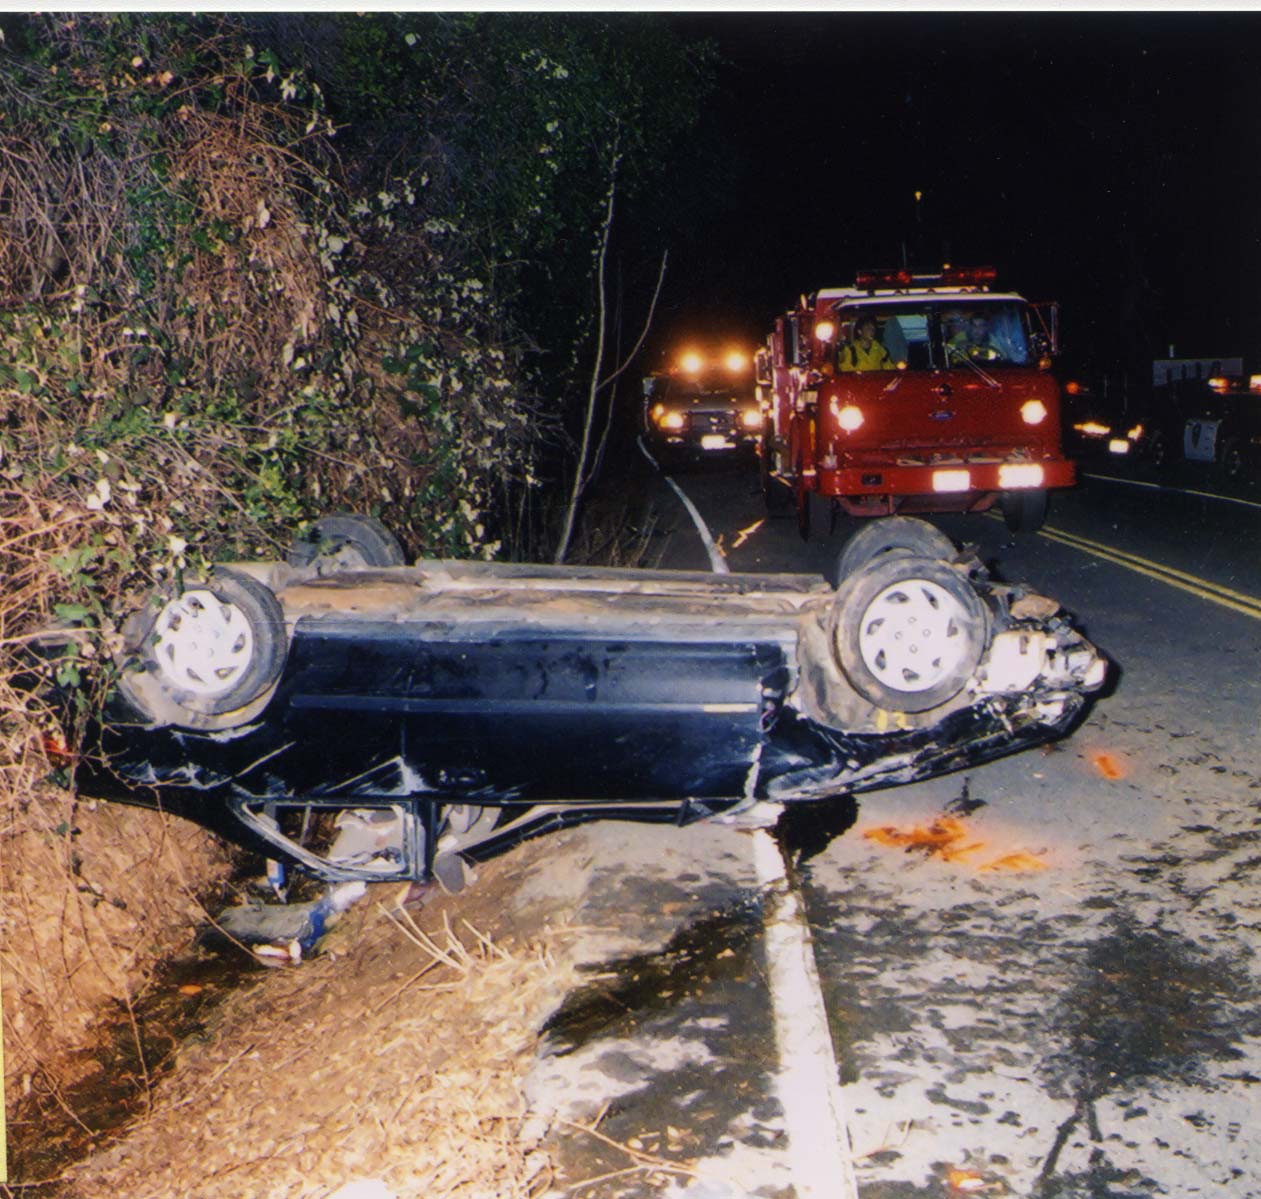 17-year-old Sarah Davis was a passenger in this Honda Civic, which crashed in March 1999, leaving her paralyzed